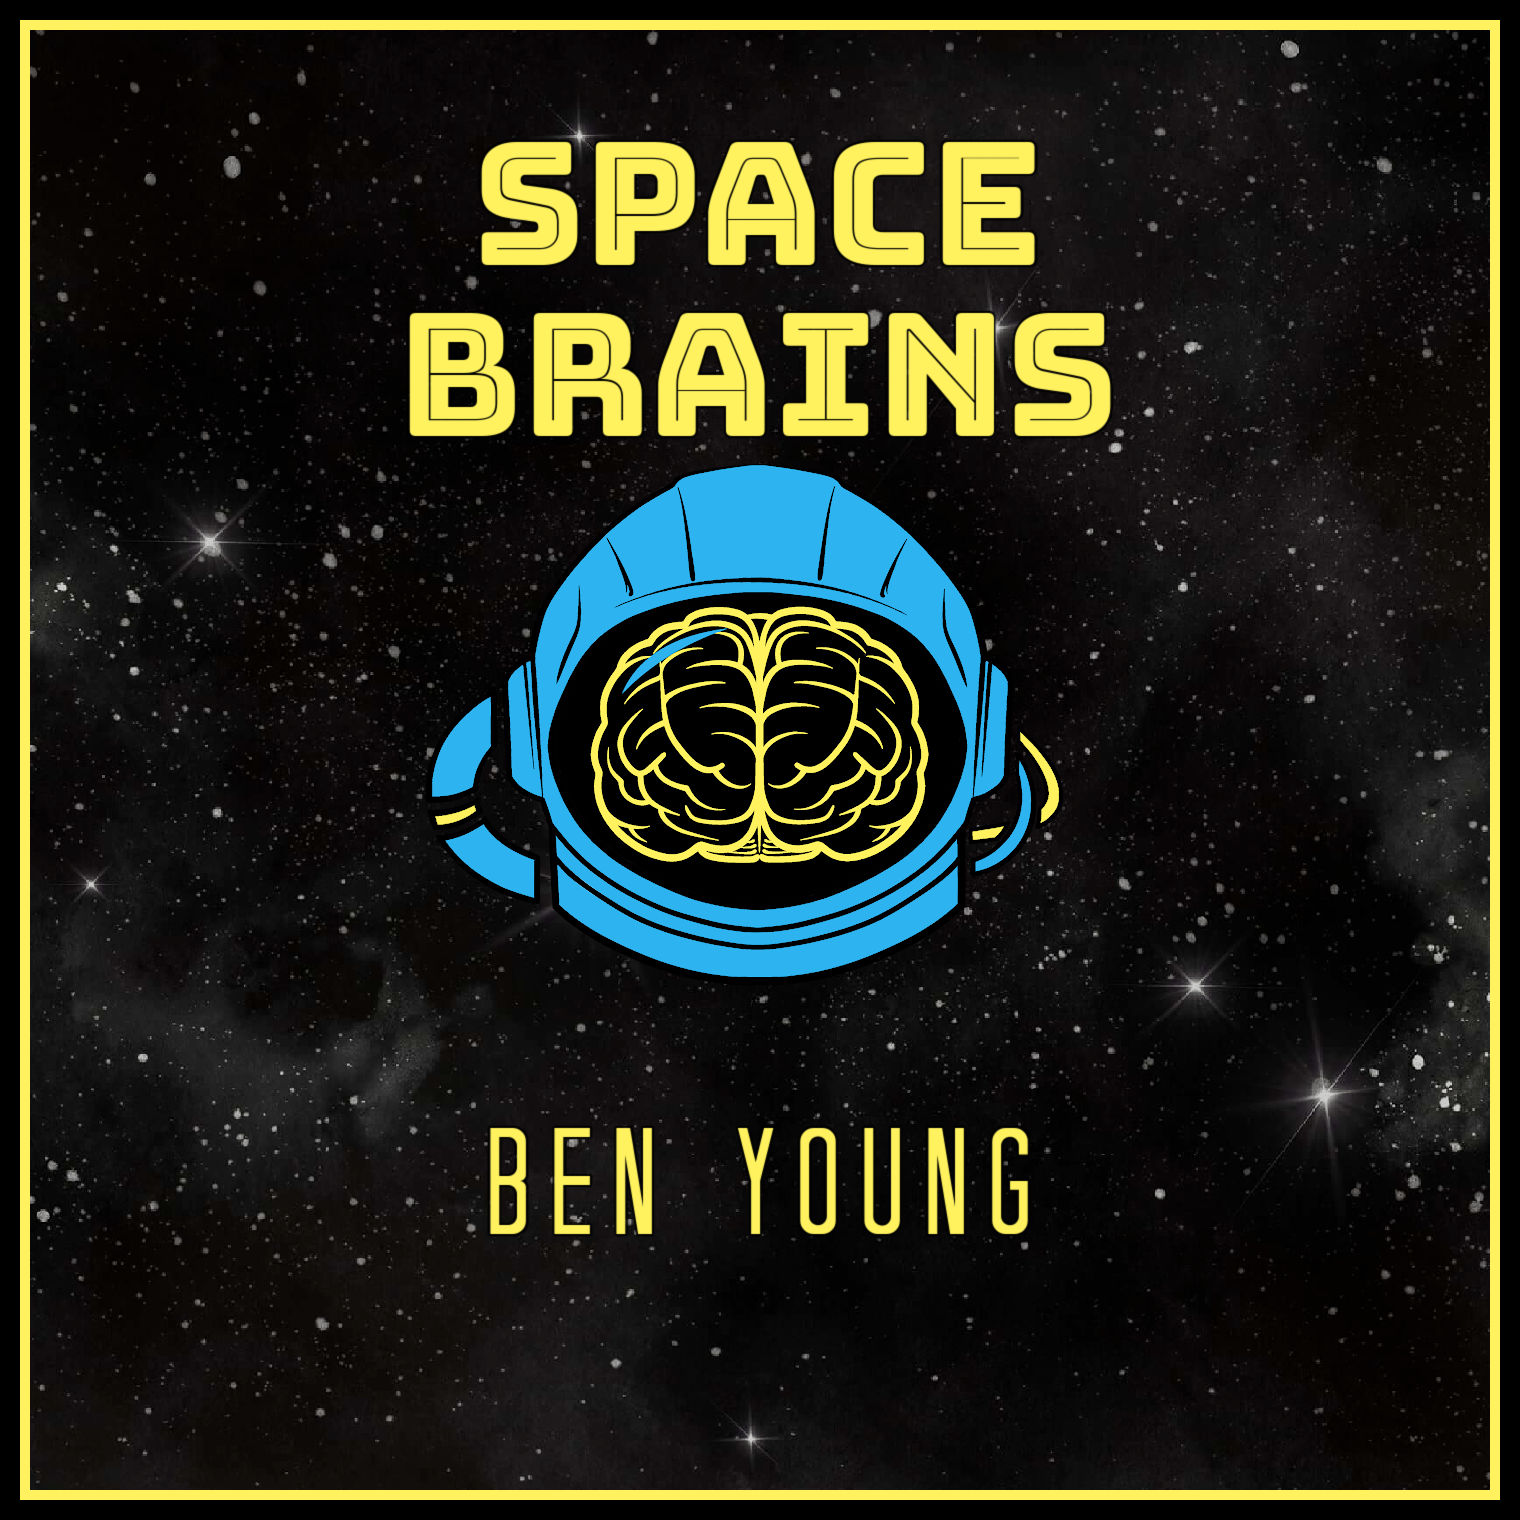 Space Brains - 86 - Ben Young